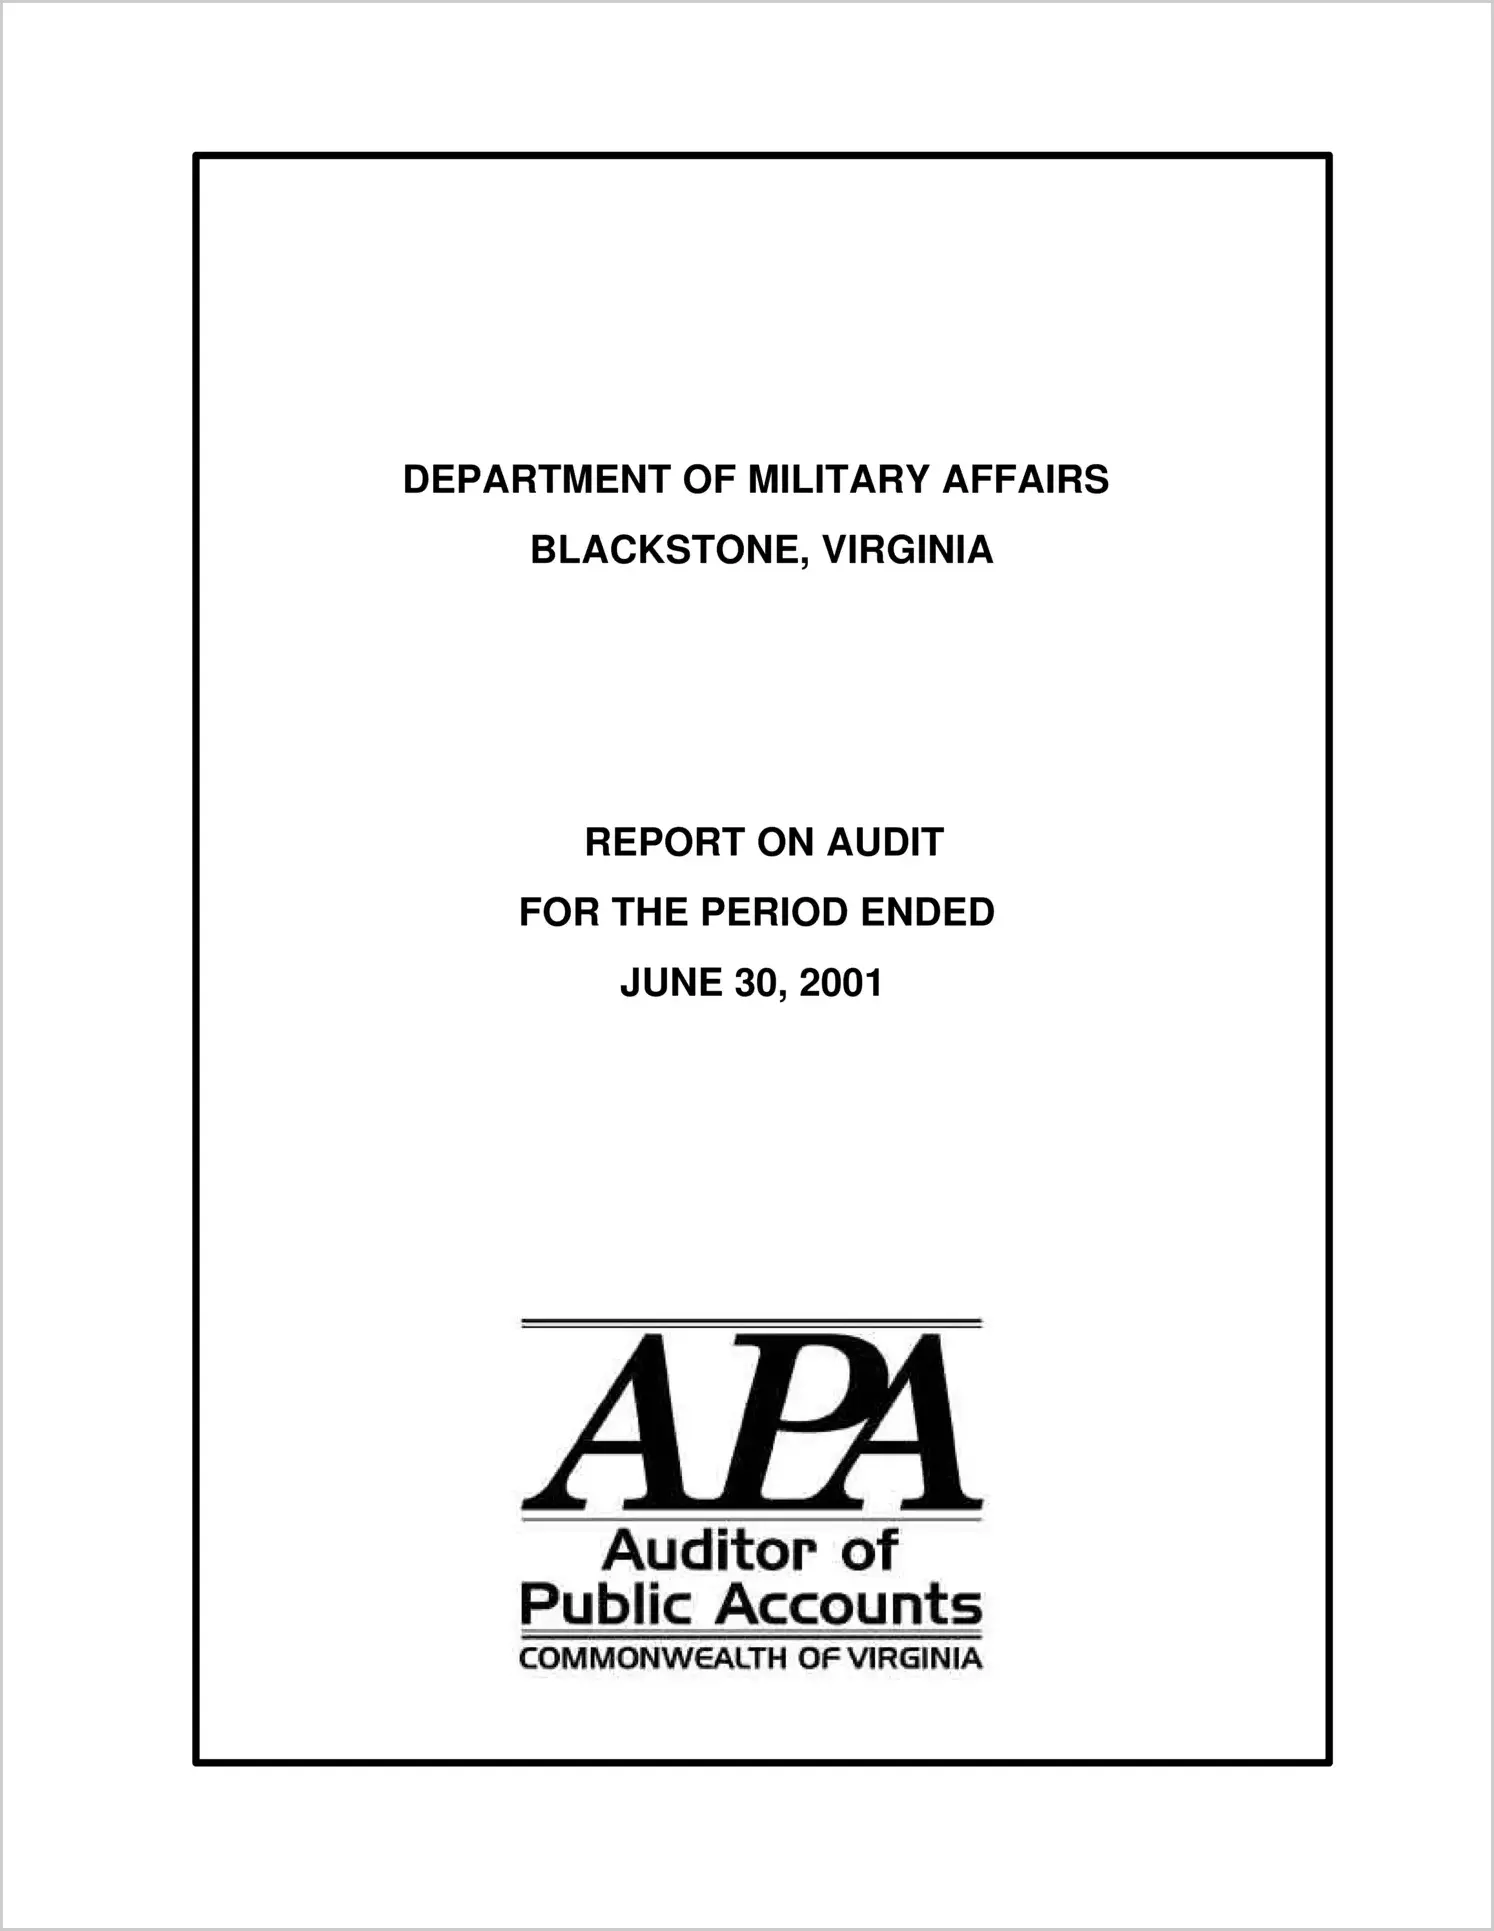 Department of Military Affairs for the period ended June 30, 2001